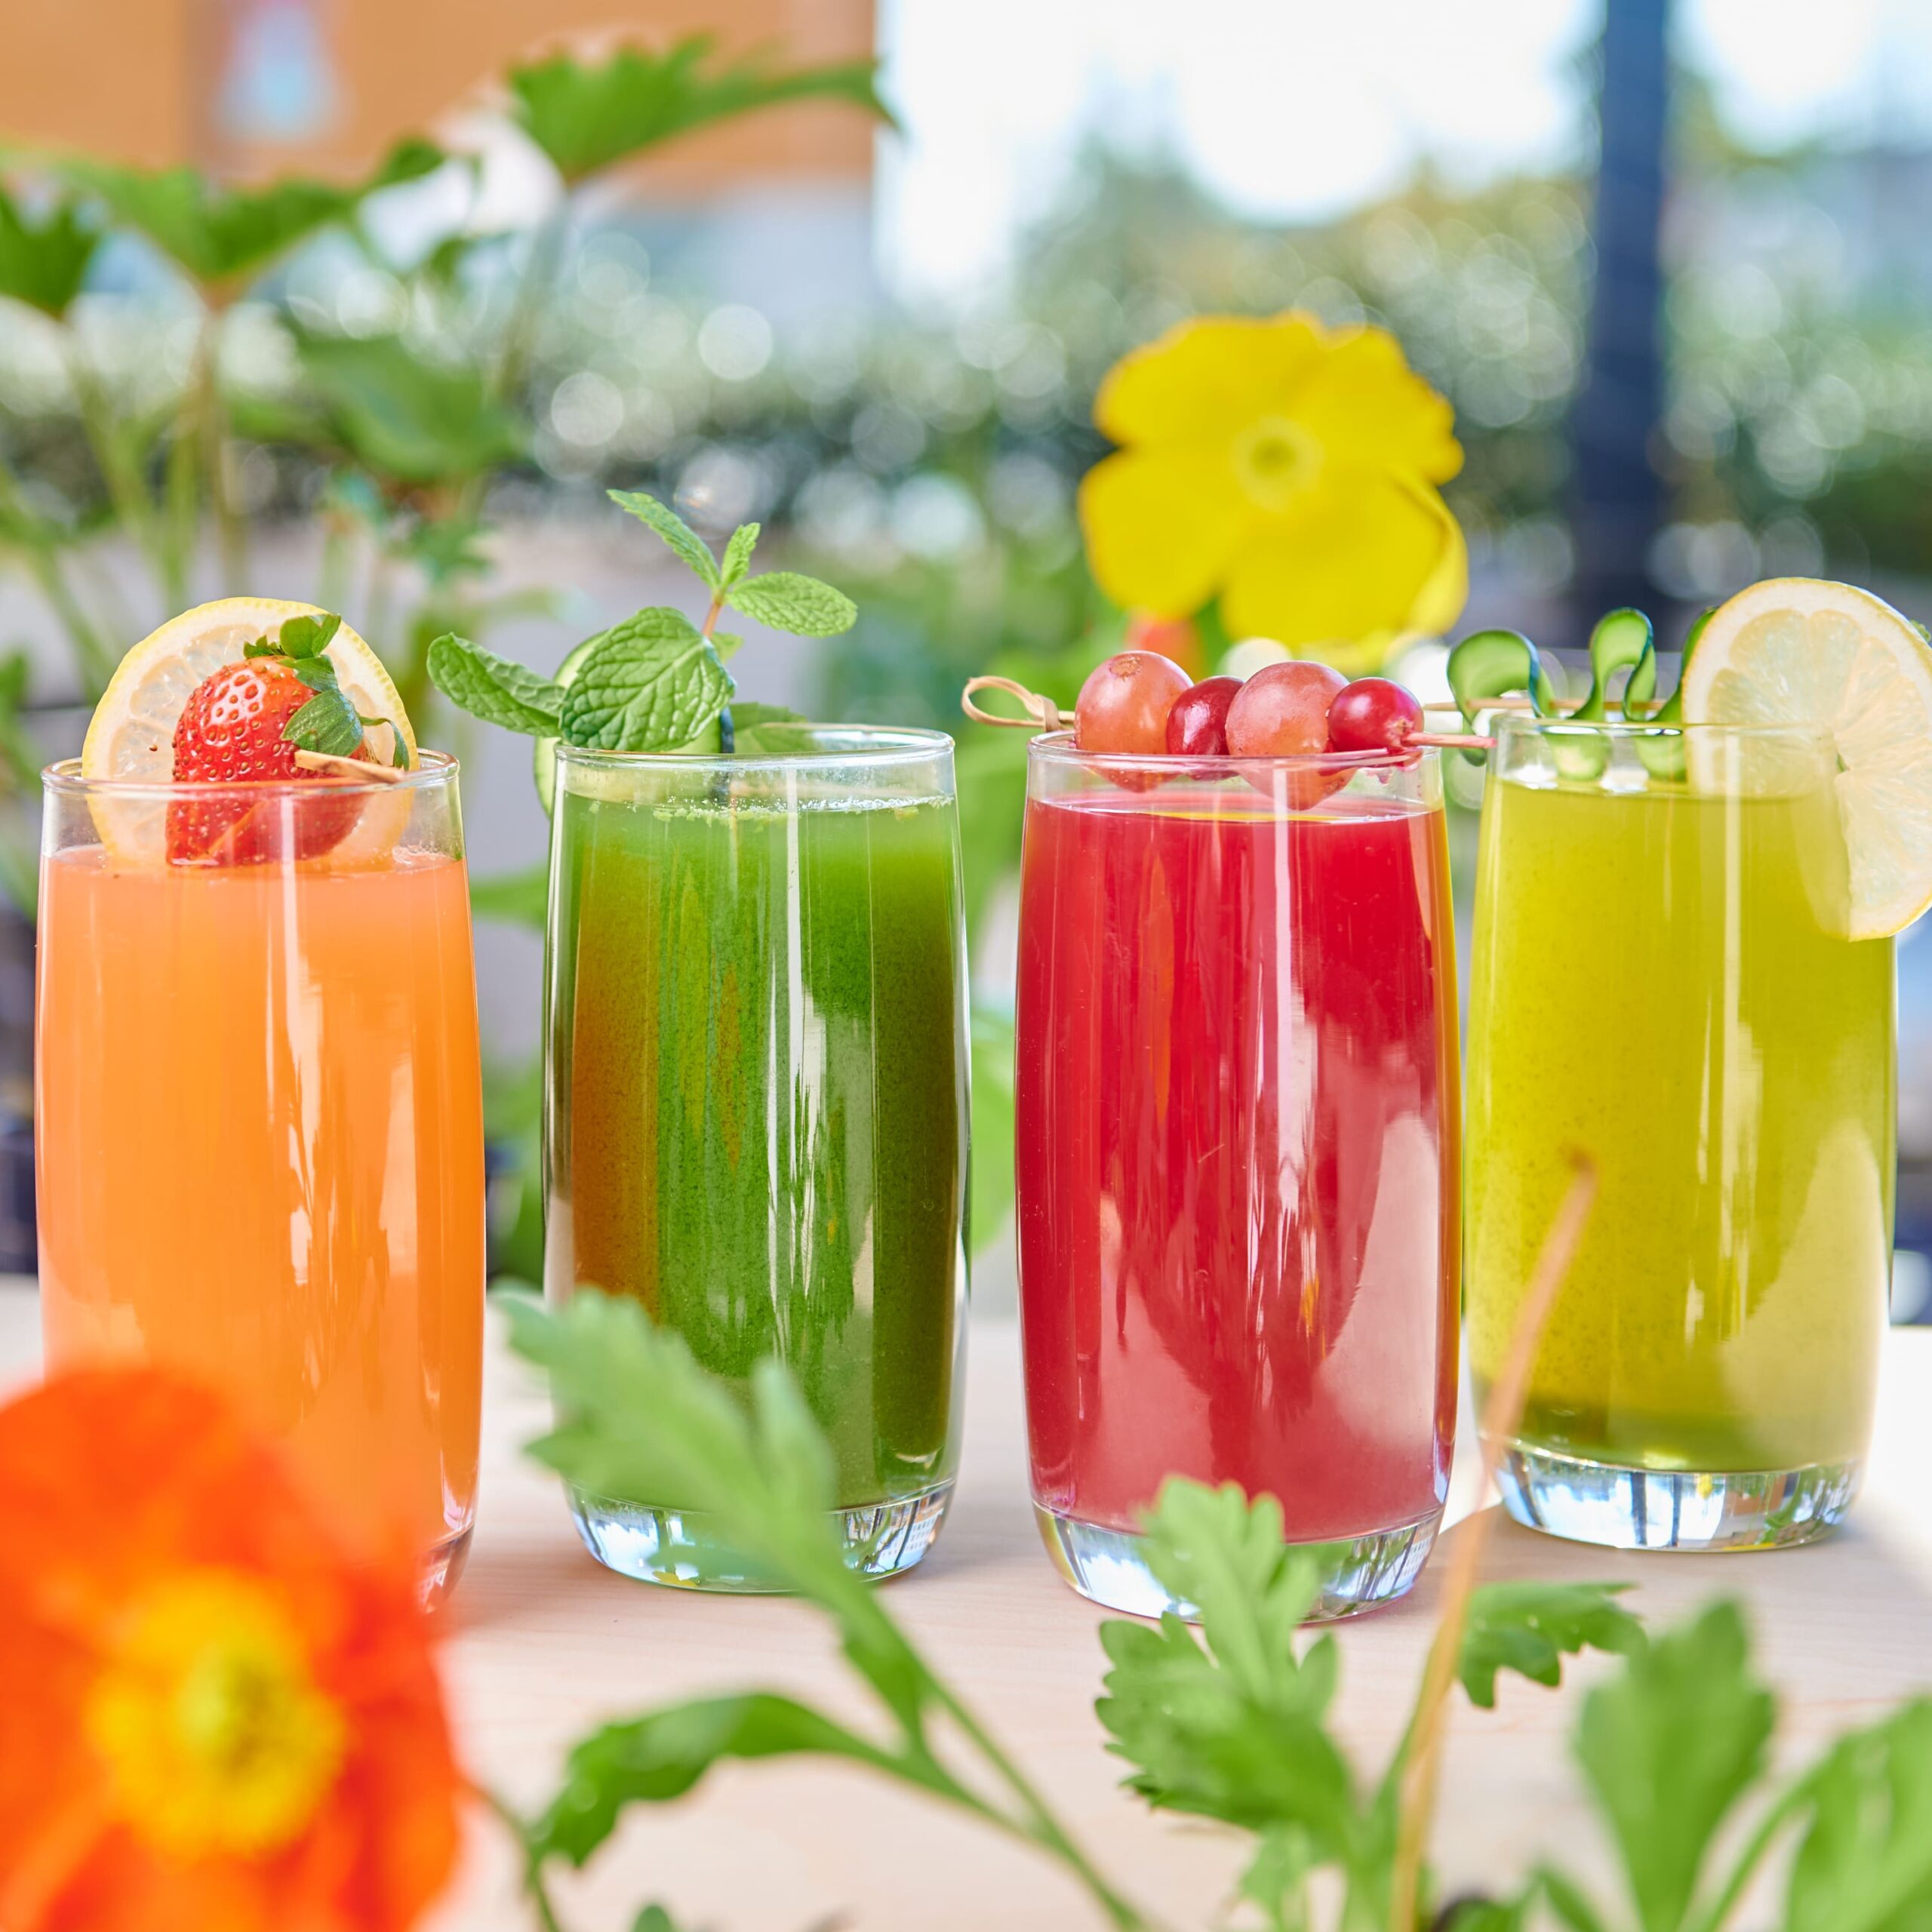 Start the new year by ditching meat and joining Veganuary at Café Gratitude! The beloved plant-based restaurant is offering a juice cleanse made with delicious fresh juices, wellness shots, and smoothies.